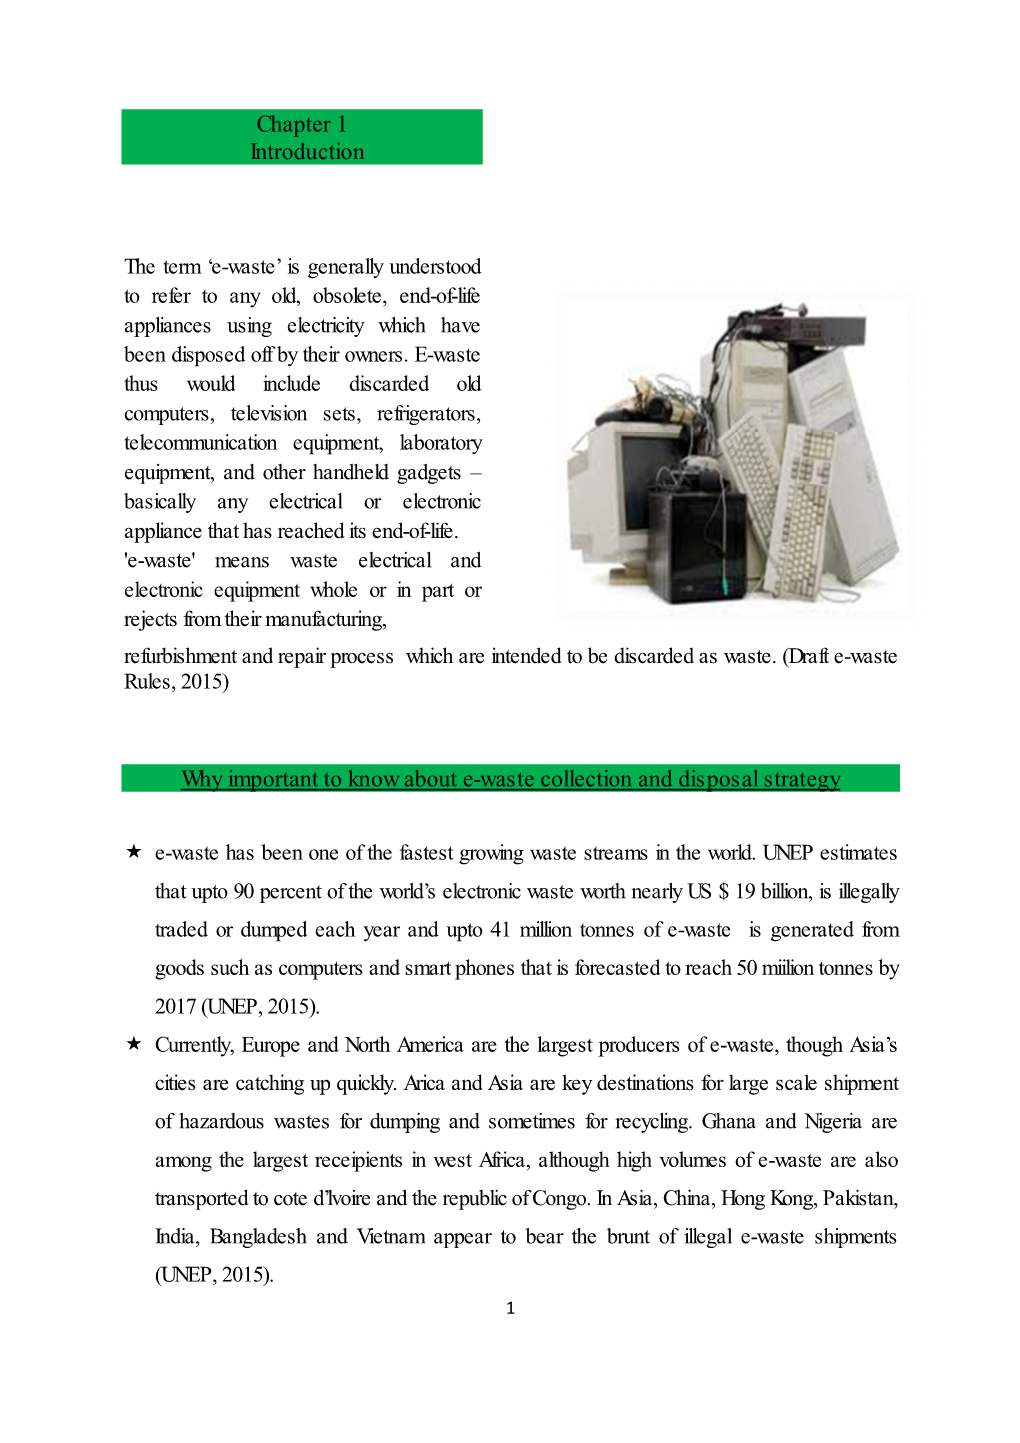 View Inventorisation Report on E-Waste 2015